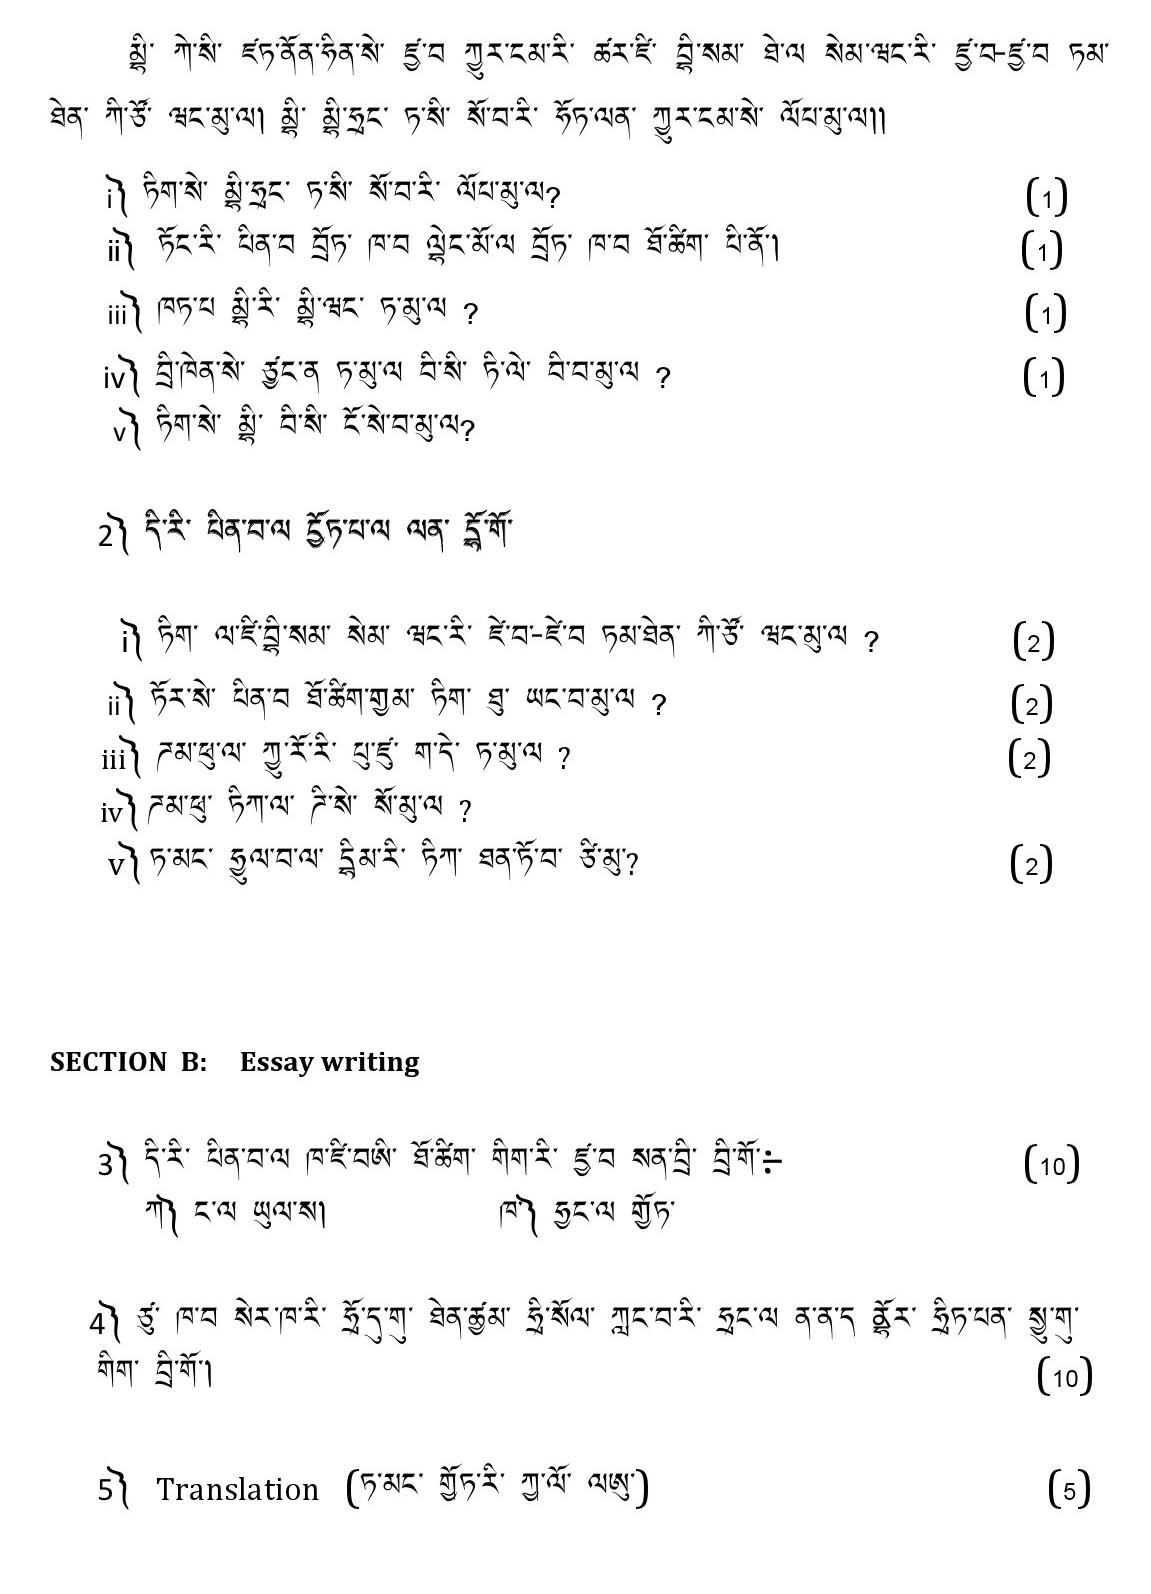 Tamang CBSE Class X Sample Question Paper 2019 20 - Image 2